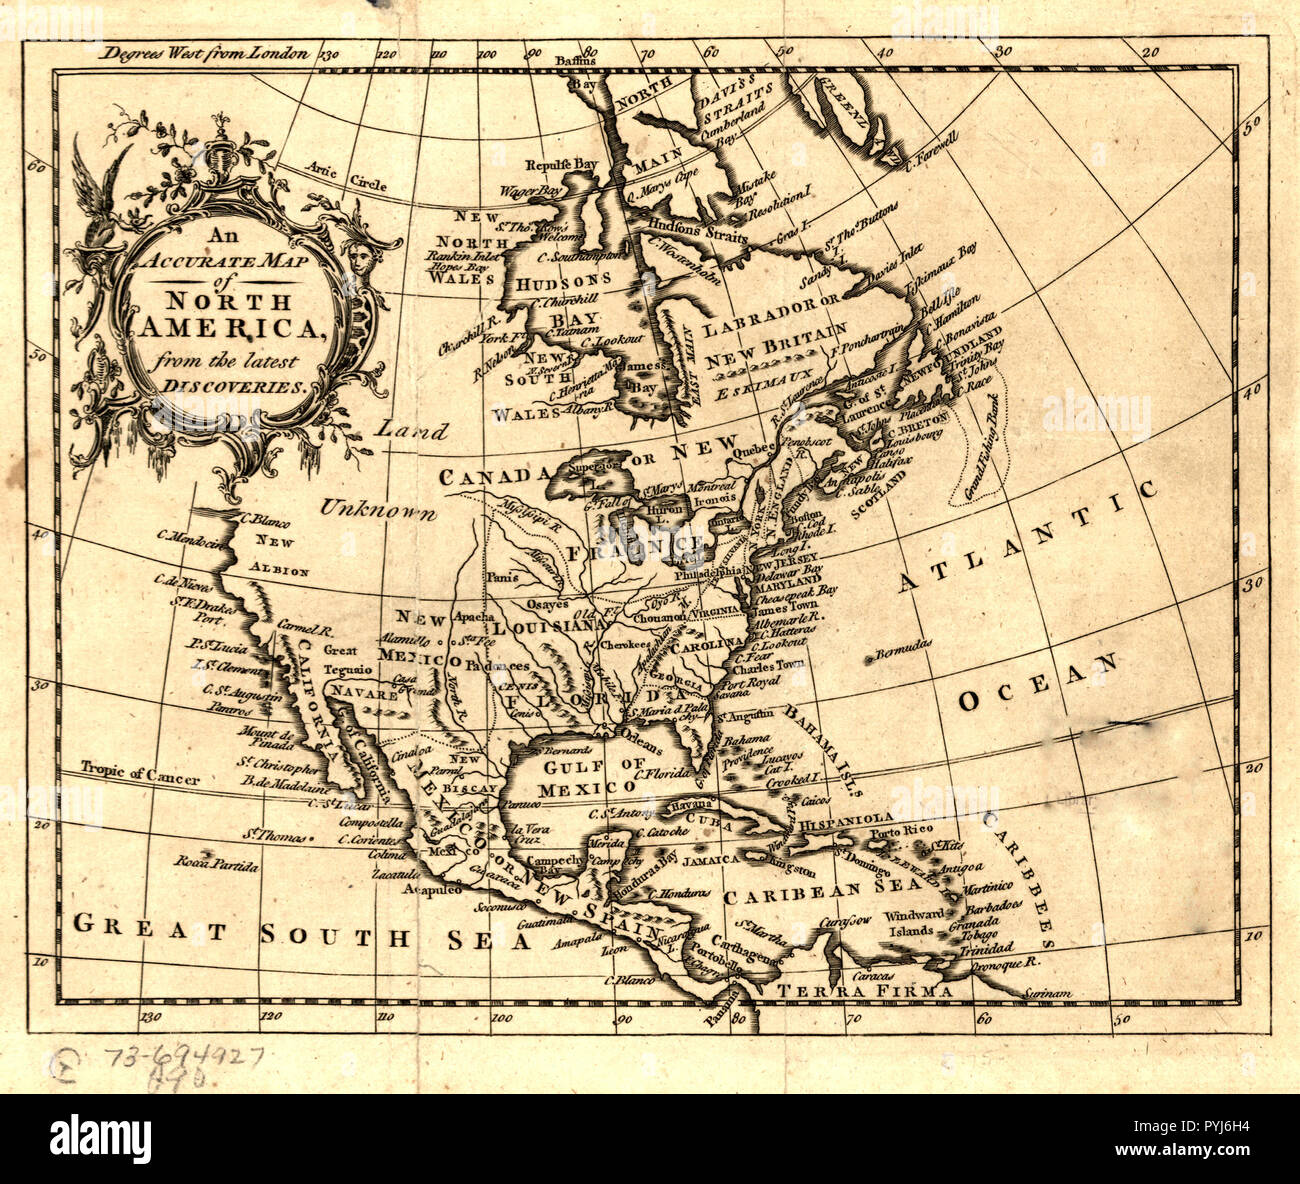 Antique map of North America 1750s Stock Photo